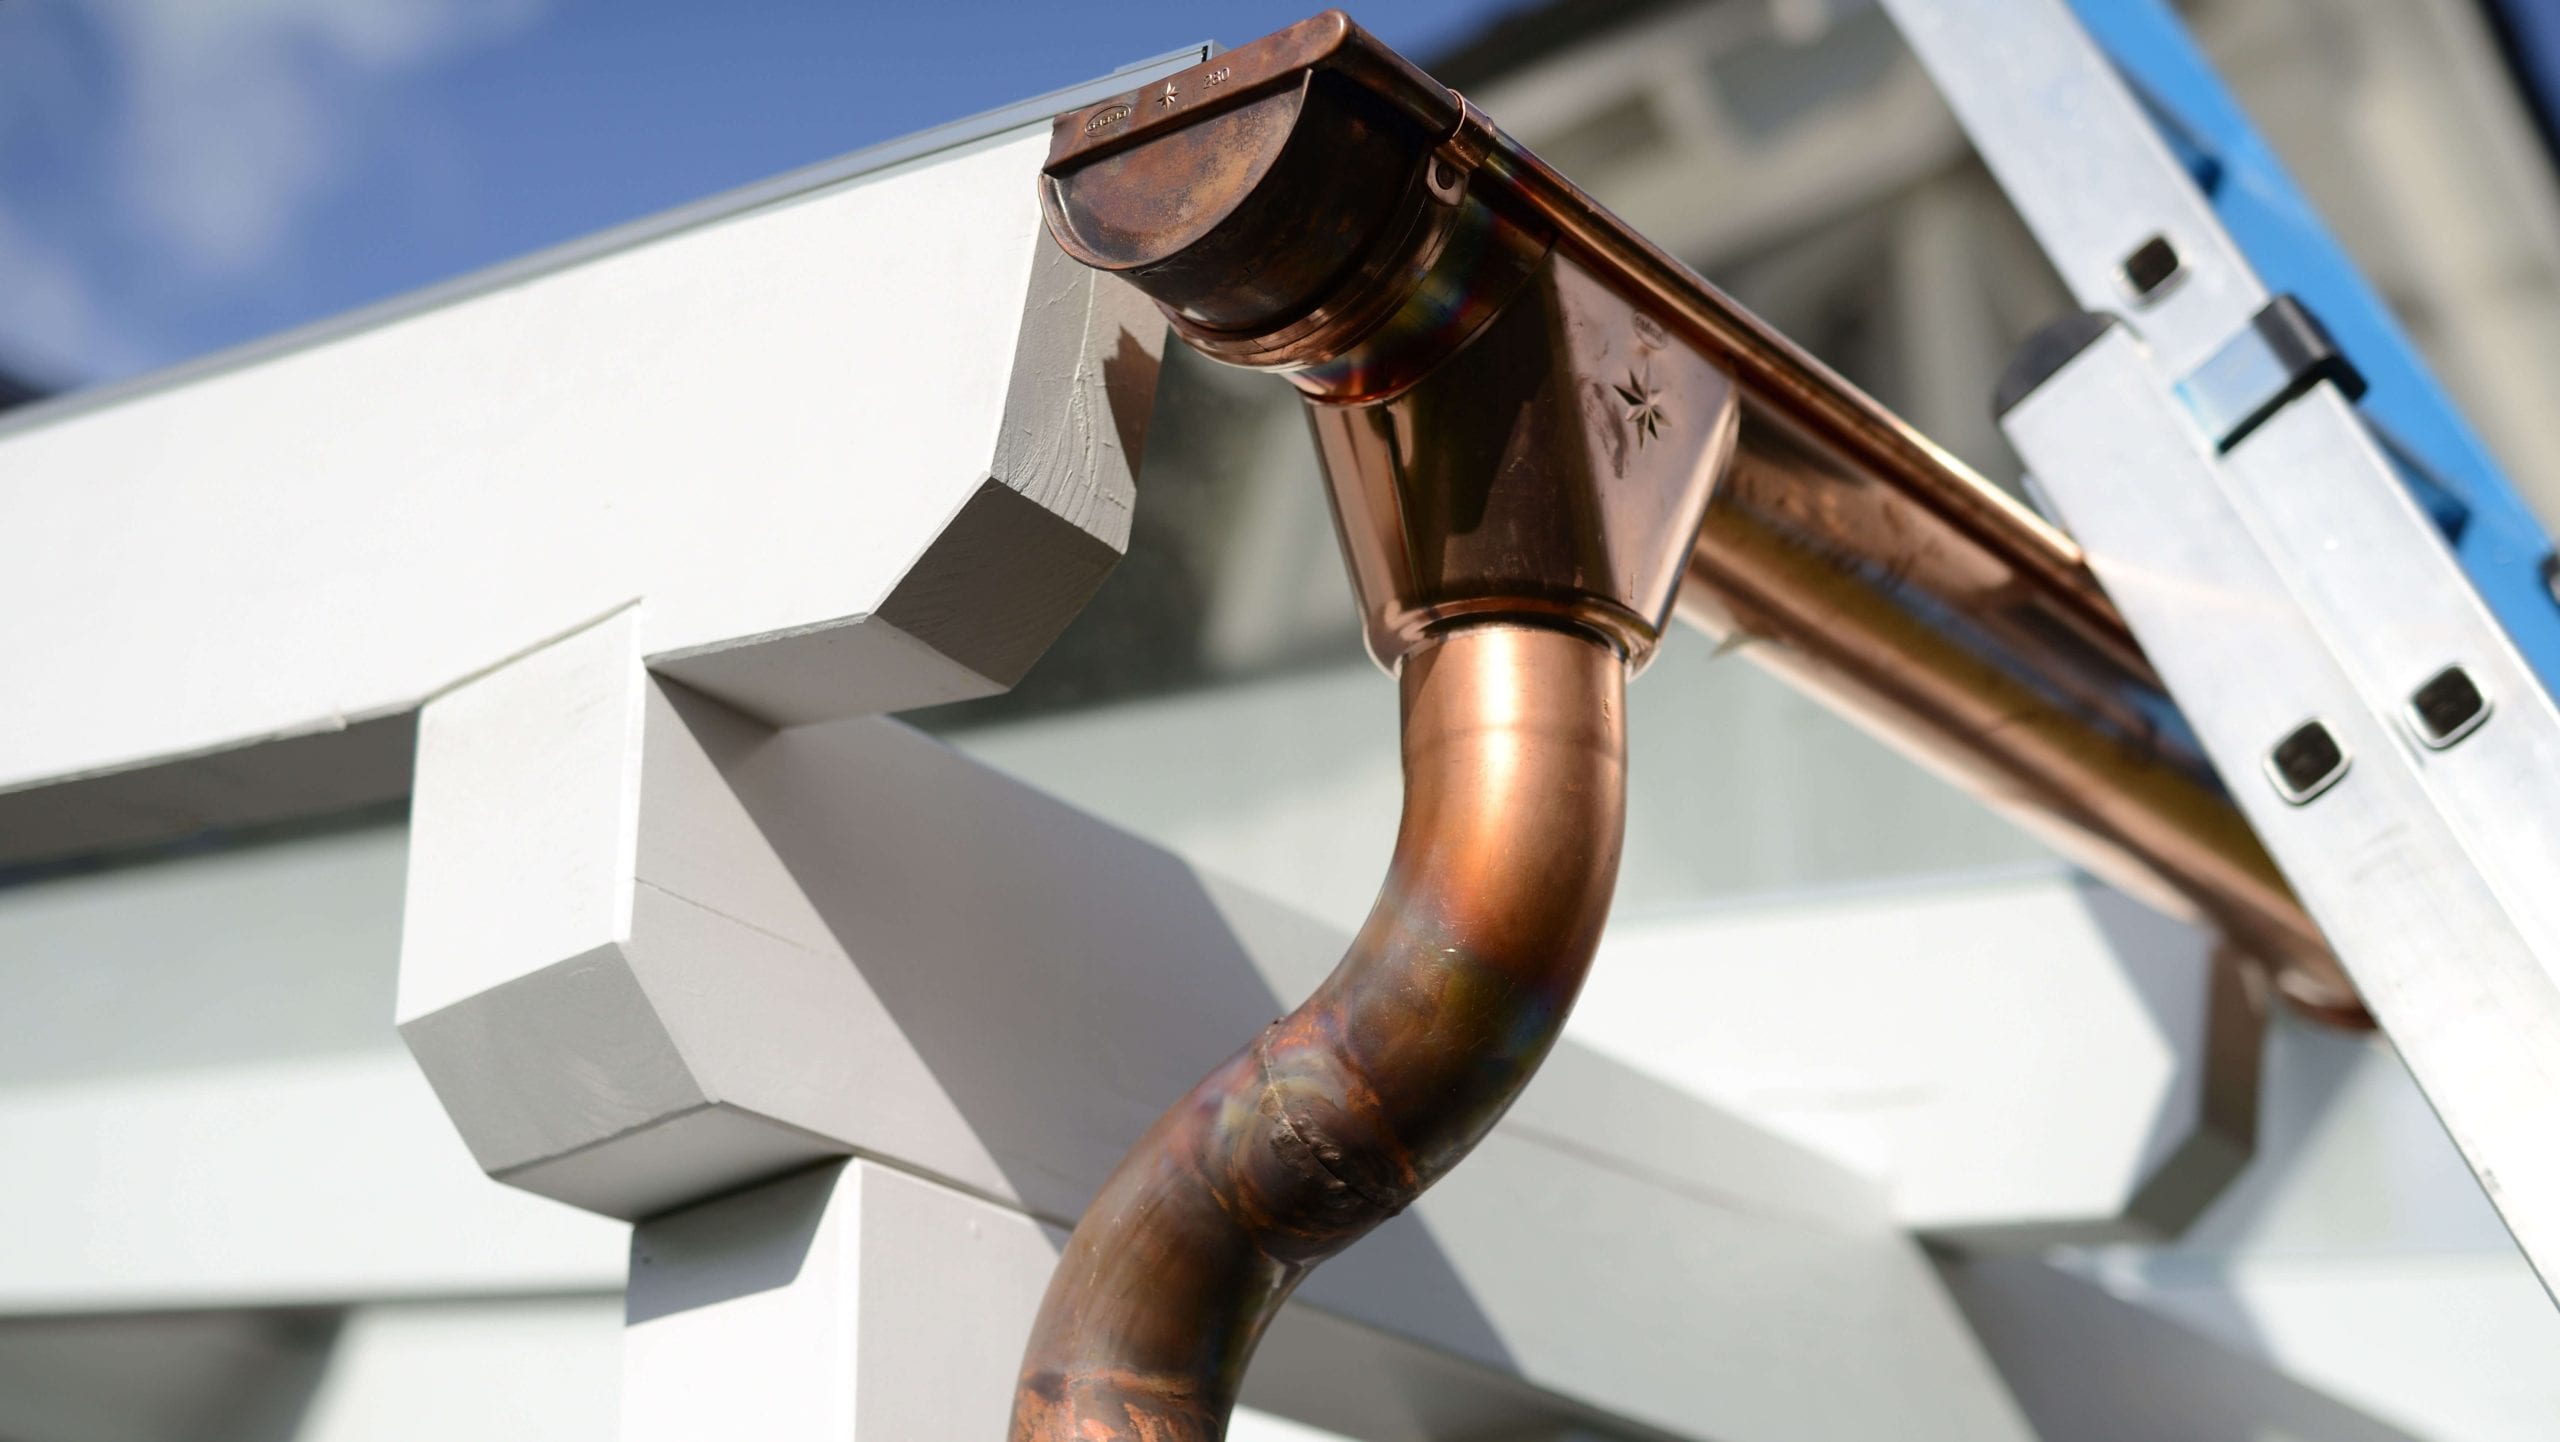 Make your property stand out with copper gutters. Contact for gutter installation in Chesapeake